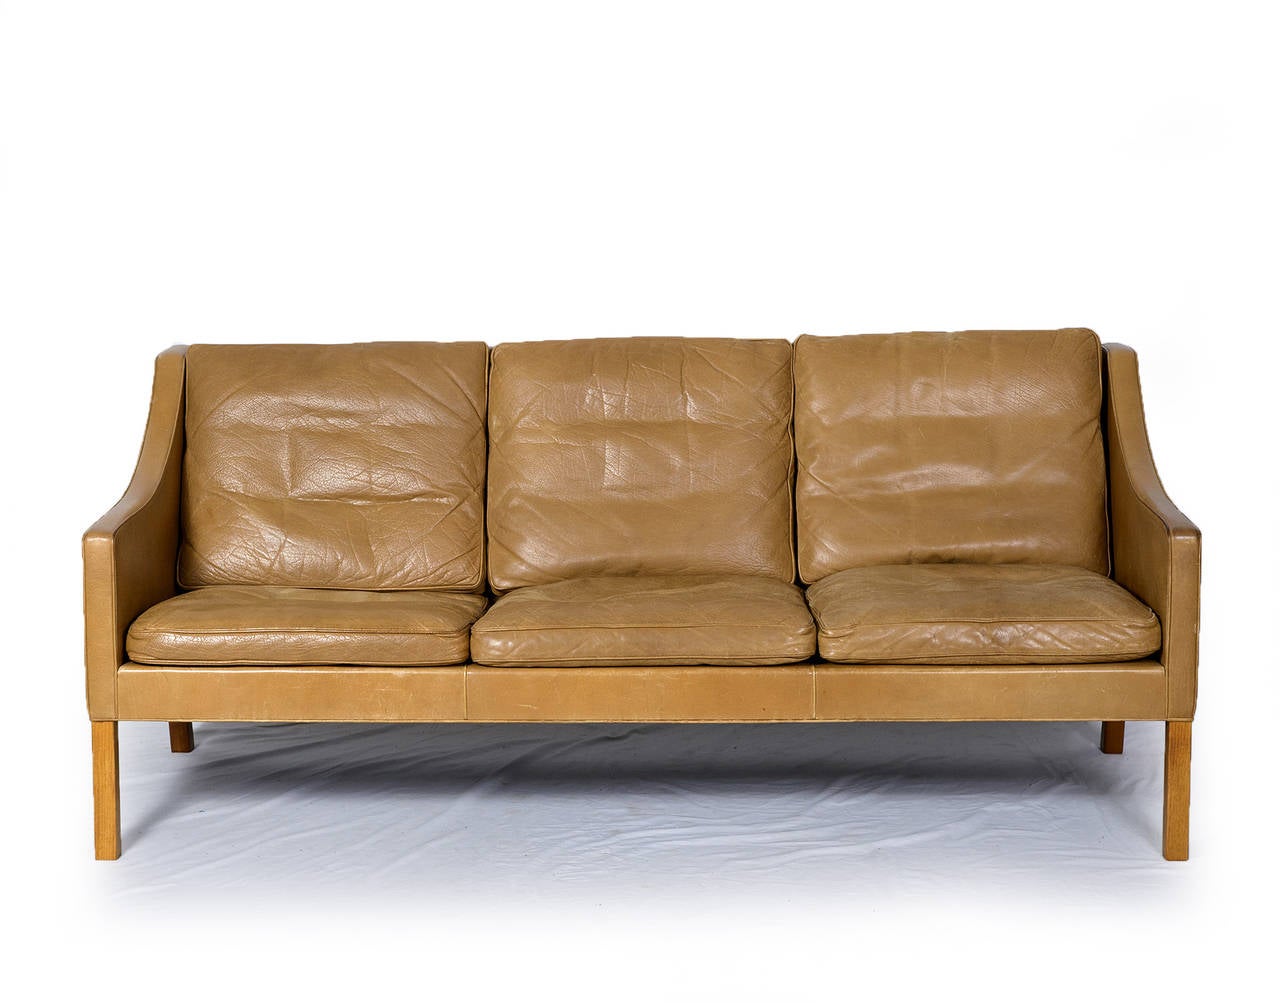 Borge Mogensen model #2209 three-seat leather sofa designed in 1963 and produced by Fredericia. 